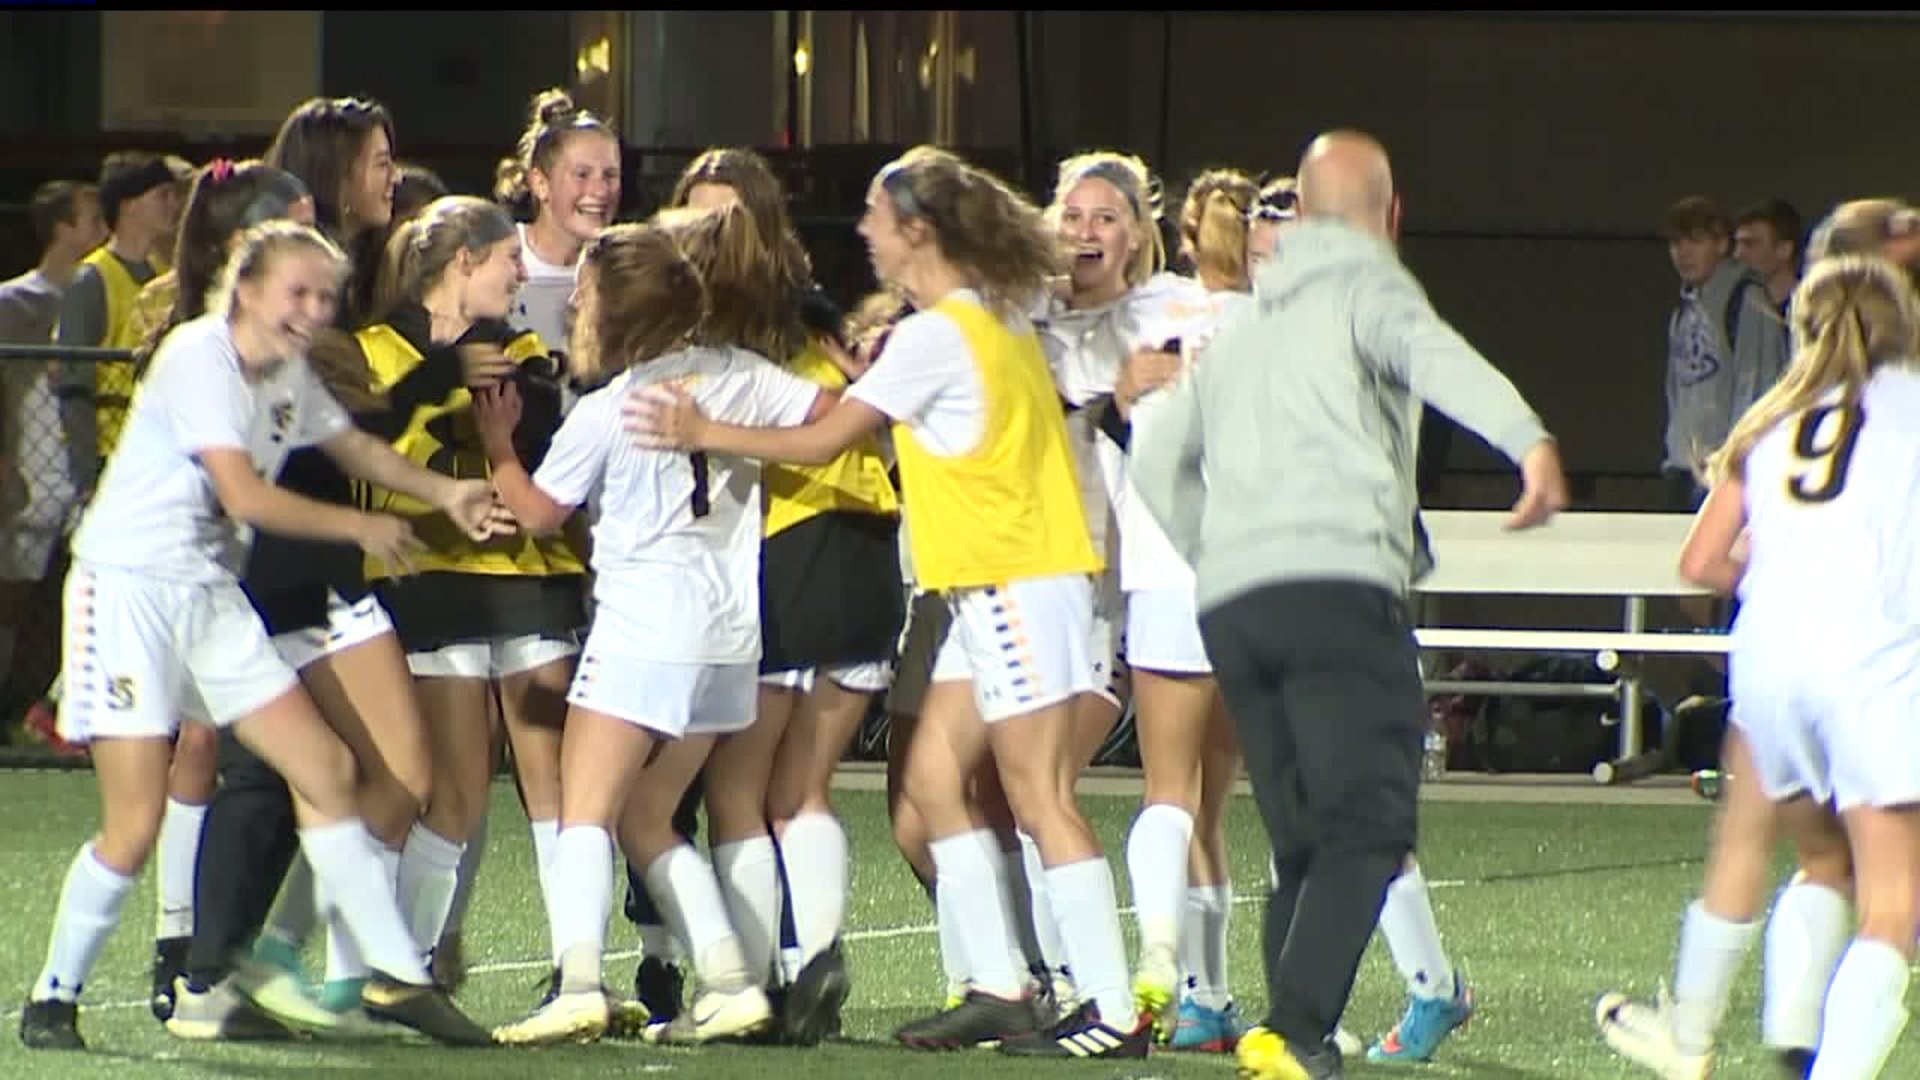 Solanco upsets top seed Lower Dauphin, 1-0